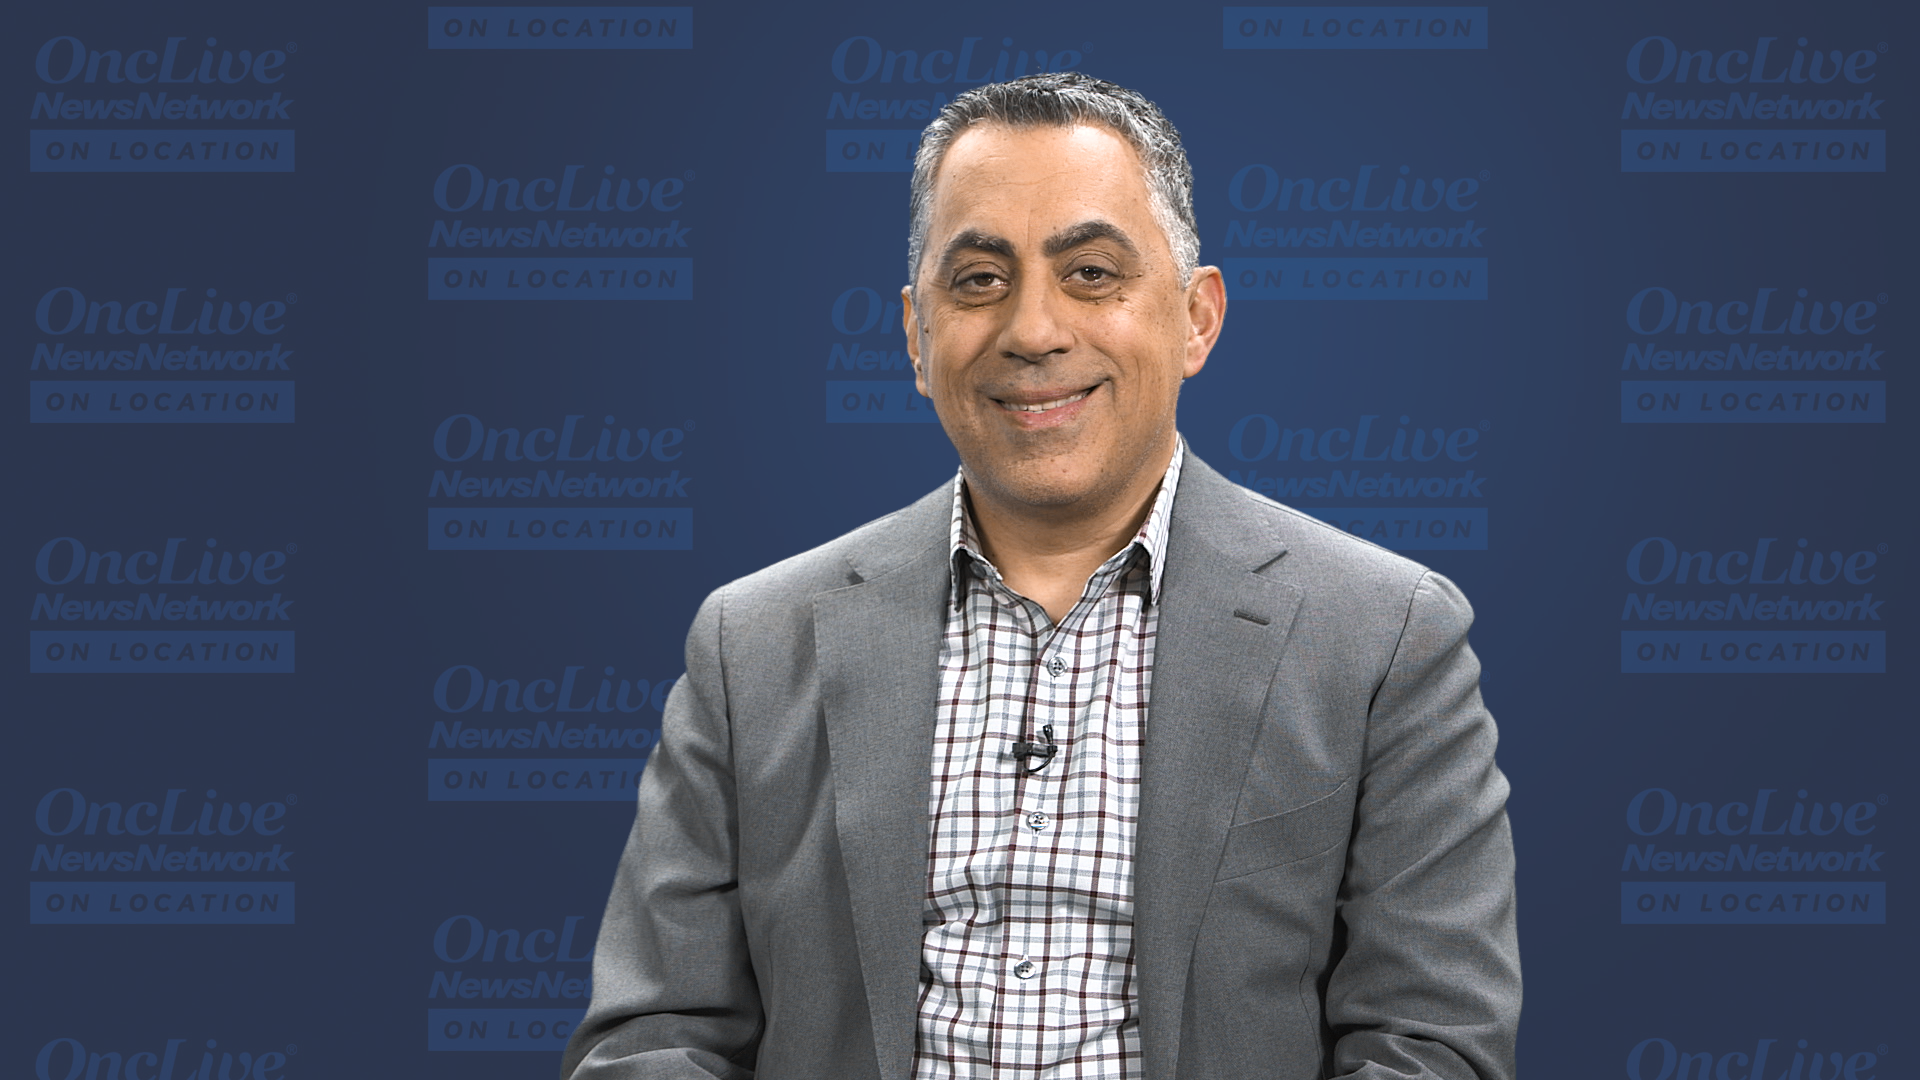 The Future of the Metastatic Colorectal Cancer Treatment Landscape